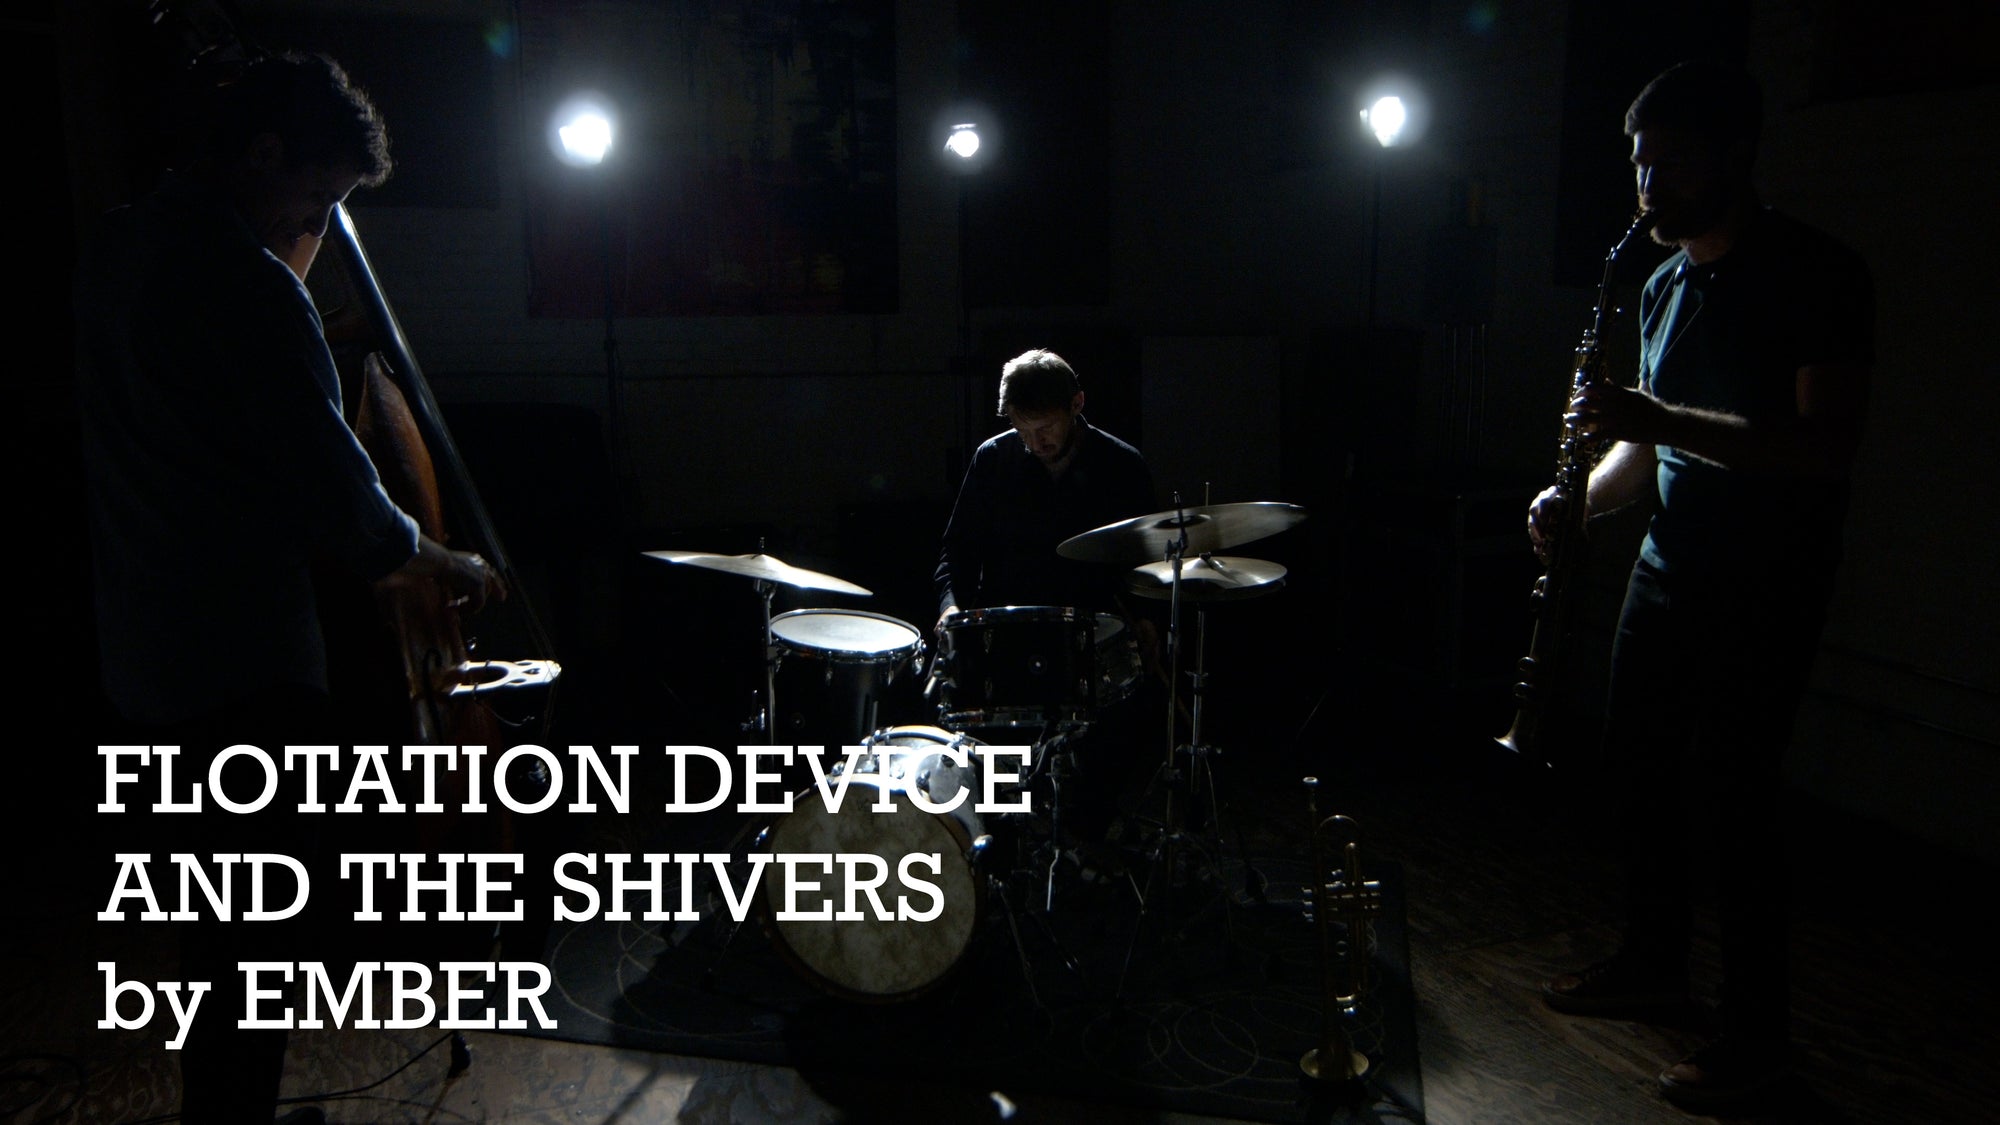 Ember – Flotation Device and the Shivers